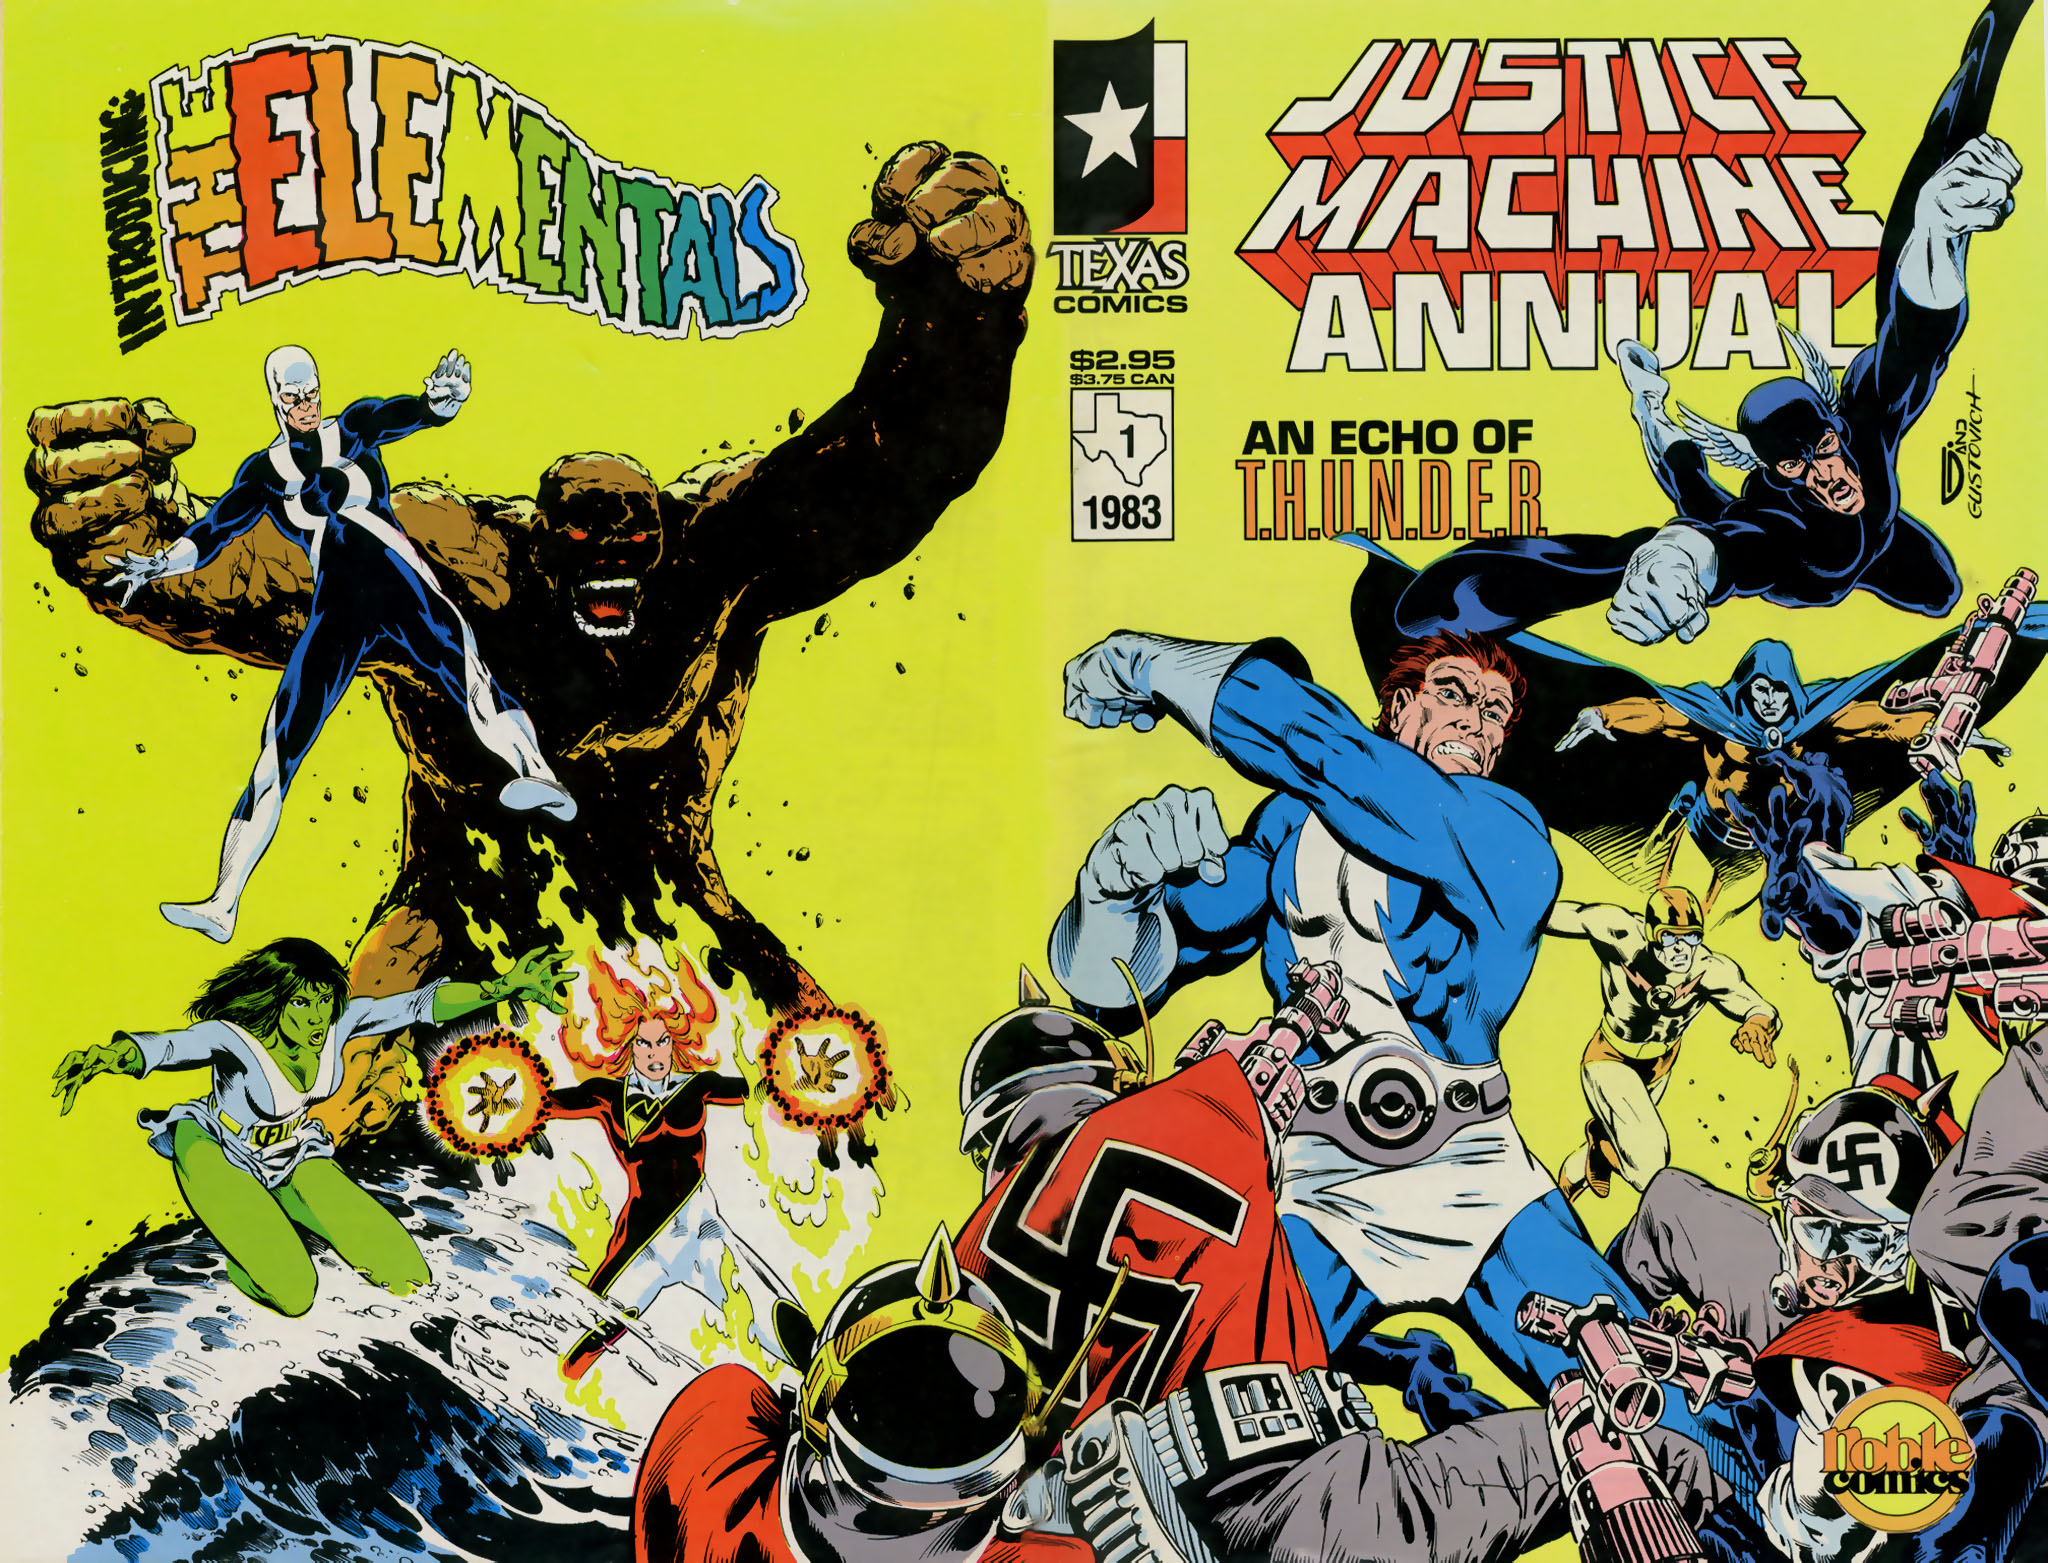 Read online Justice Machine Annual comic -  Issue # Full - 1